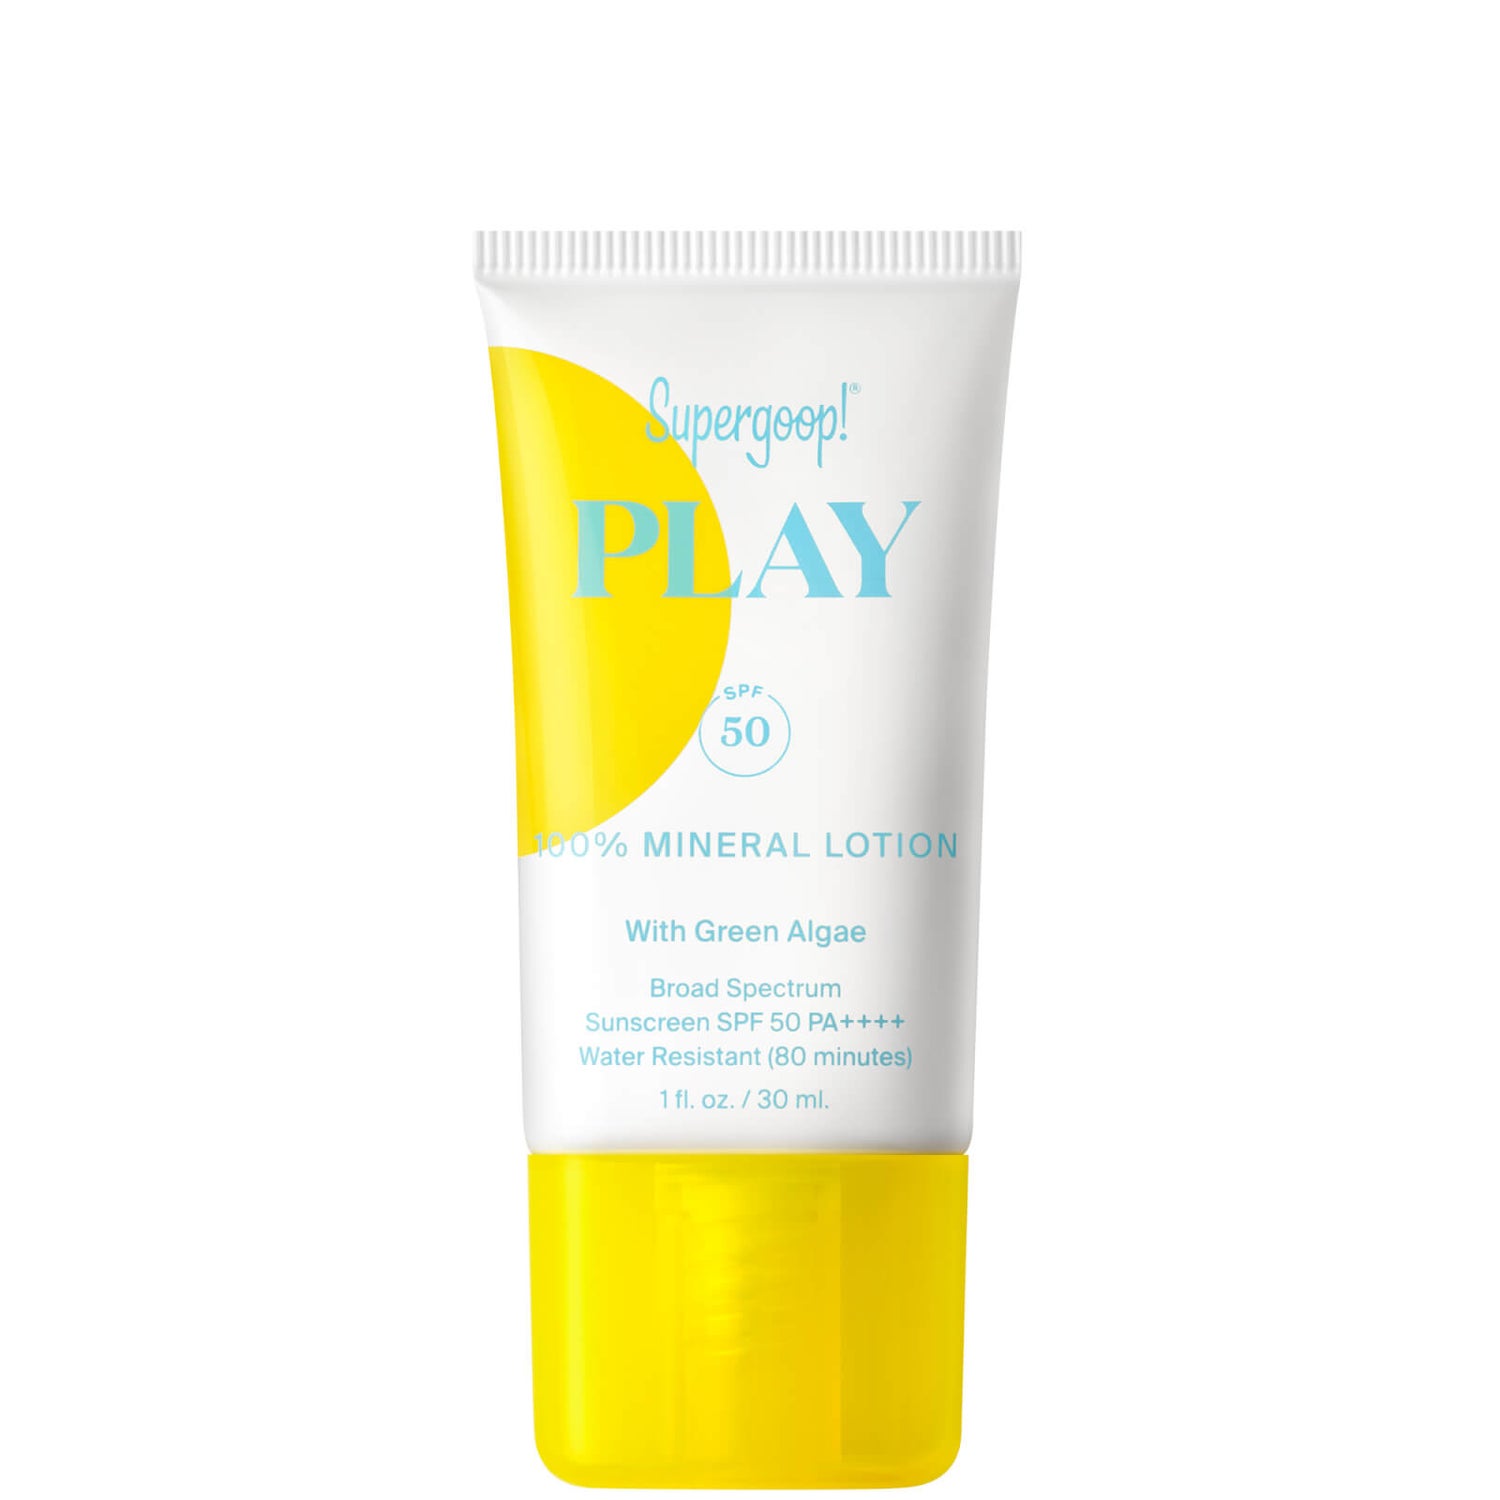 Supergoop! PLAY 100% Mineral Lotion SPF50 with Green Algae 1 fl. oz